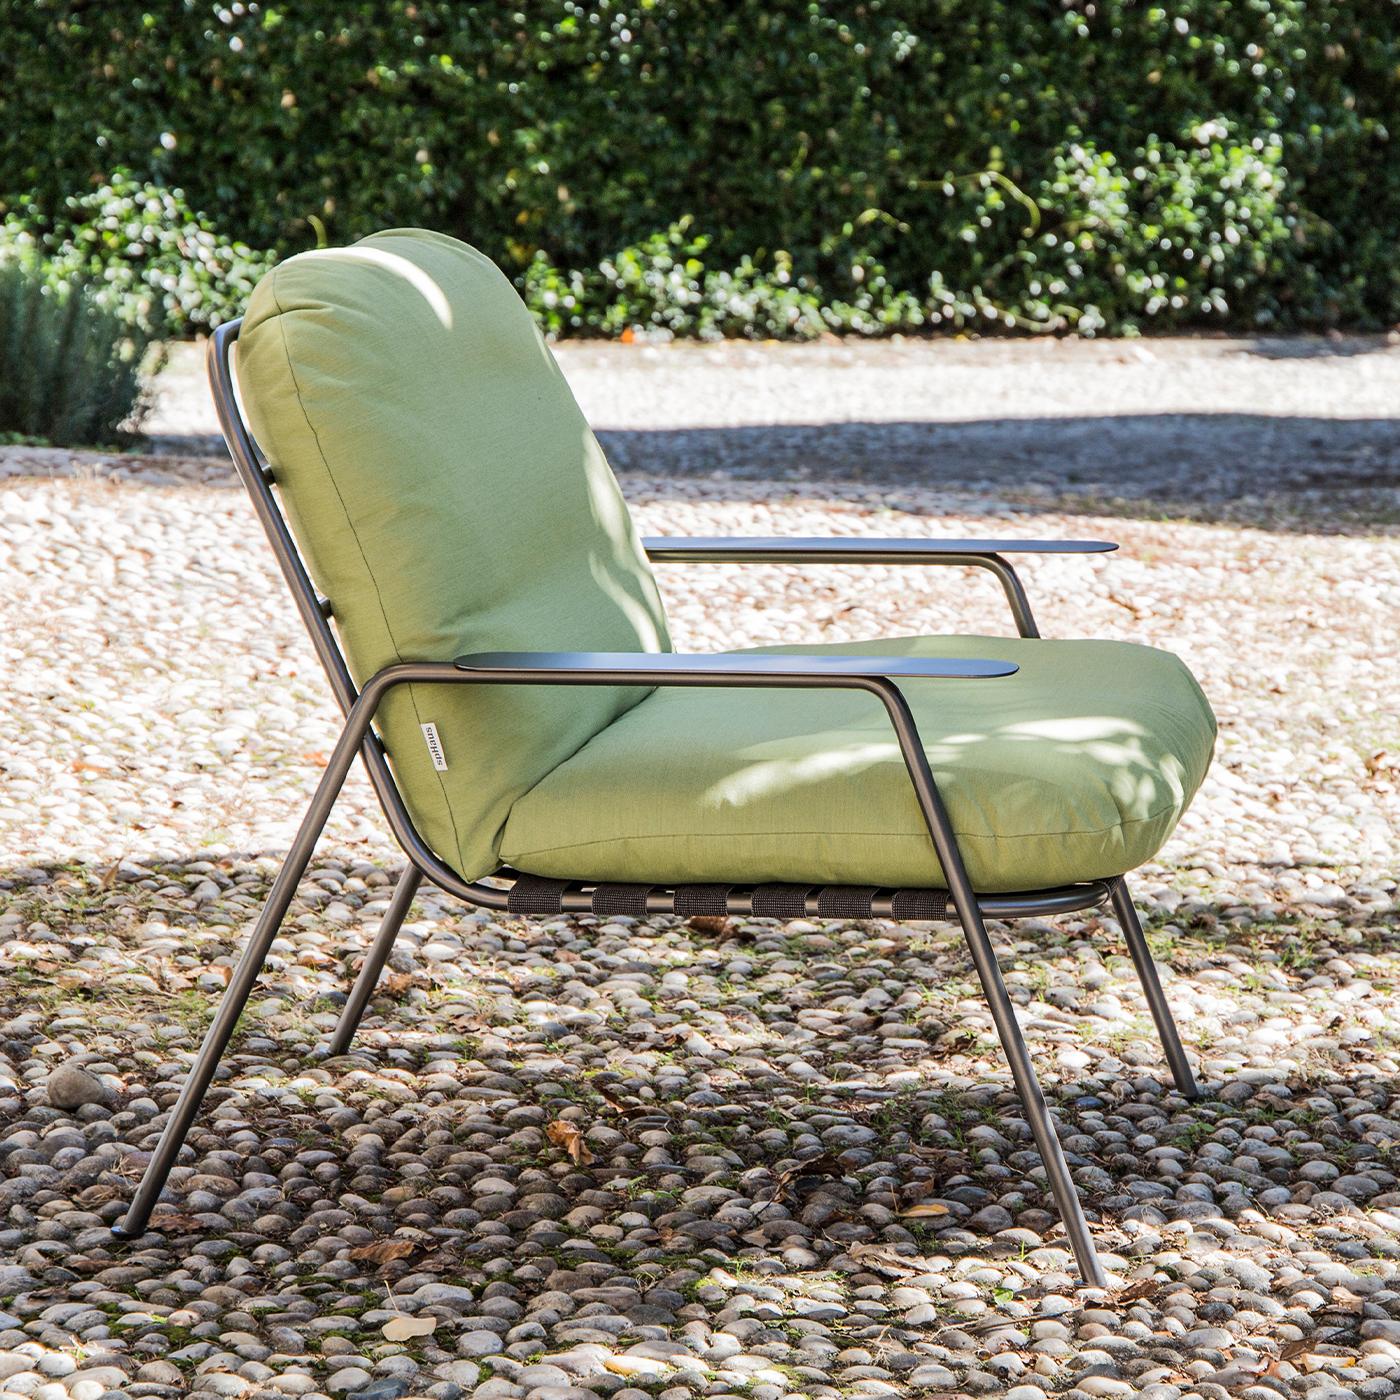 Noya is a lounge chair meant for outdoor or indoor use. The tubular coated steel frame with synthetic elastic webbing on the seat is provided with an upholstered seat and back soft pillows. The frame is powder-coated in several colors. Pillows have